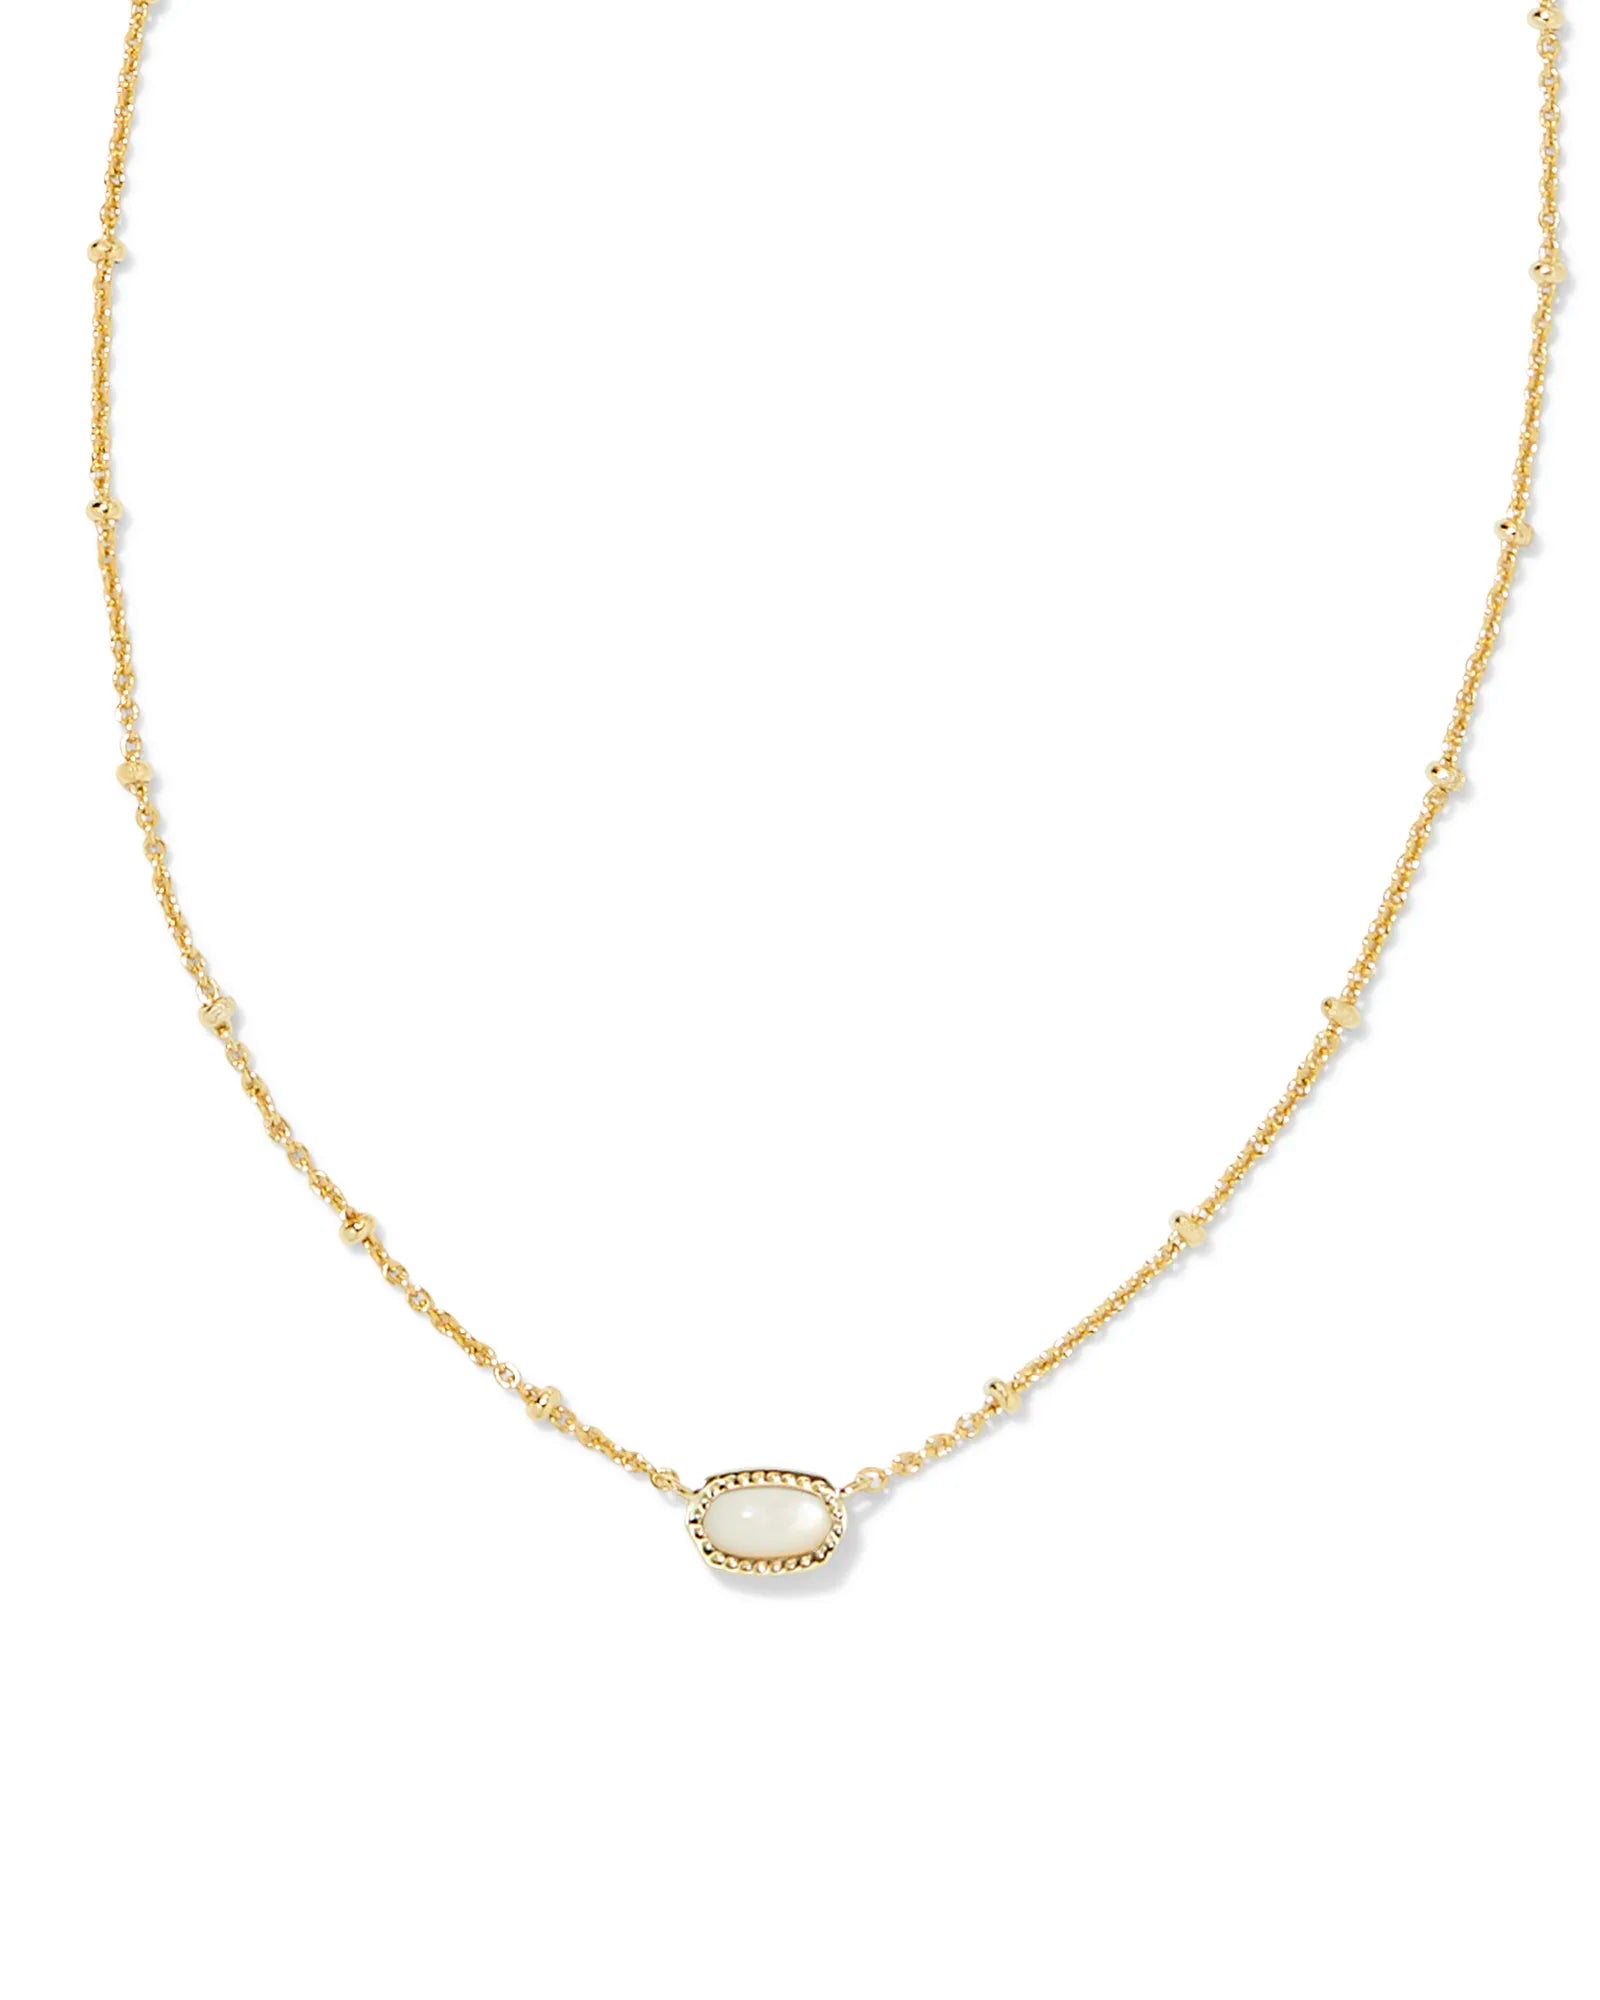 Kendra Scott |  Mini Elisa Gold Satellite Short Pendant Necklace in Ivory Mother of Pearl - Giddy Up Glamour Boutique